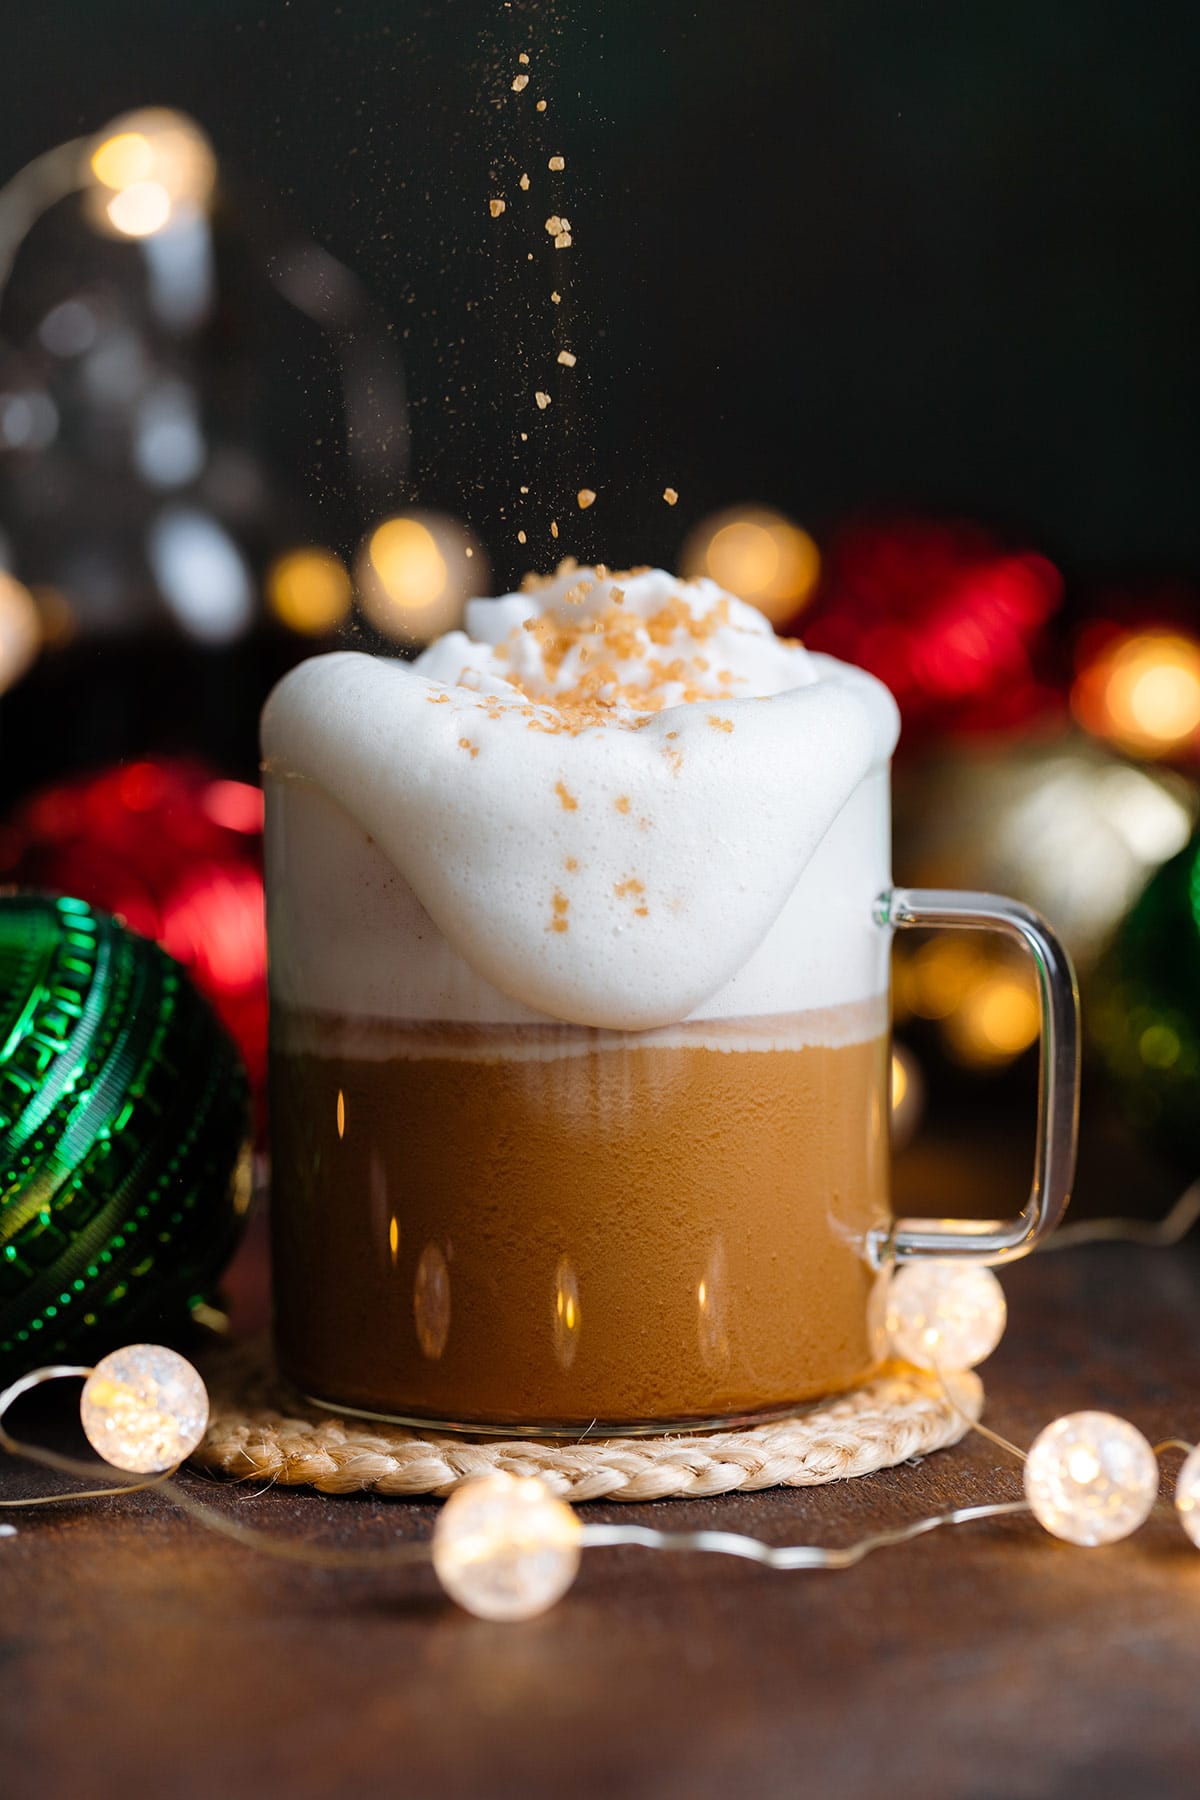 A cafe latte overflowing in a glass mug with whipped cream and coarse sugar on top on a dark wooden background with Christmas ornaments around.